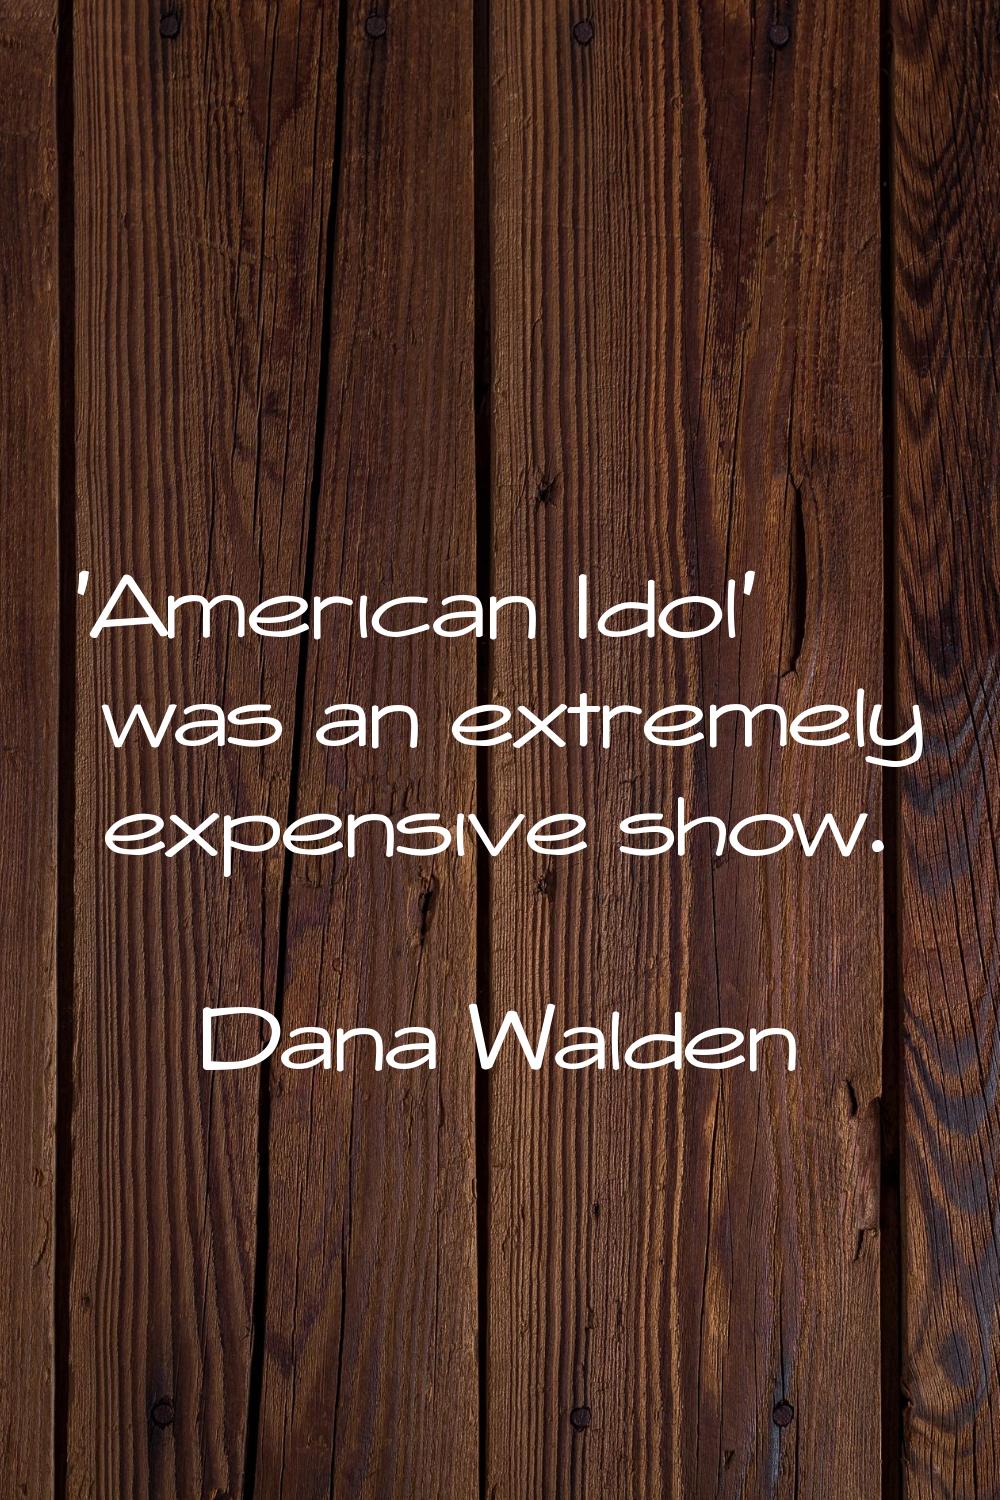 'American Idol' was an extremely expensive show.